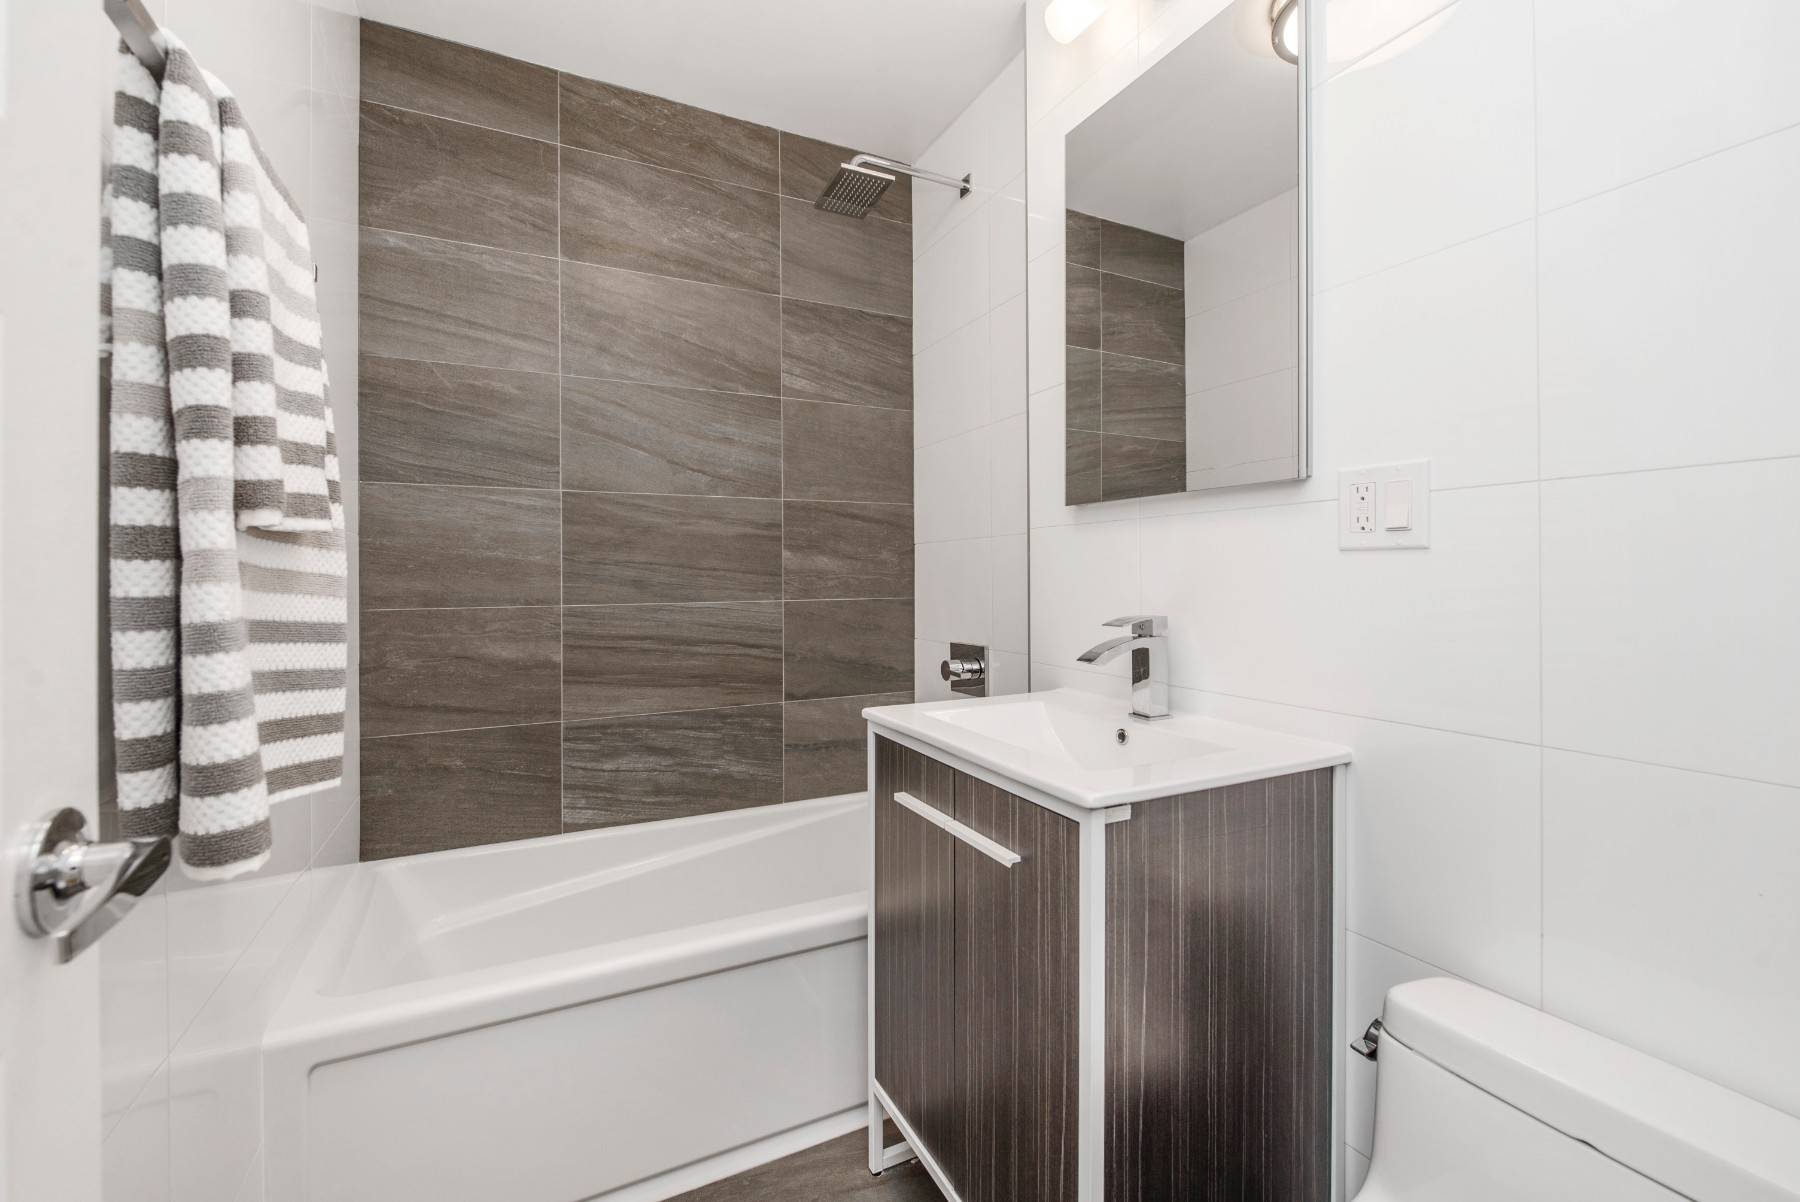 This modern, newly renovated alcove studio features new oak hardwood floors, a spacious living room, separate kitchen with stainless steel appliances and a glass tiled back splash, sparkling new bathroom, ...